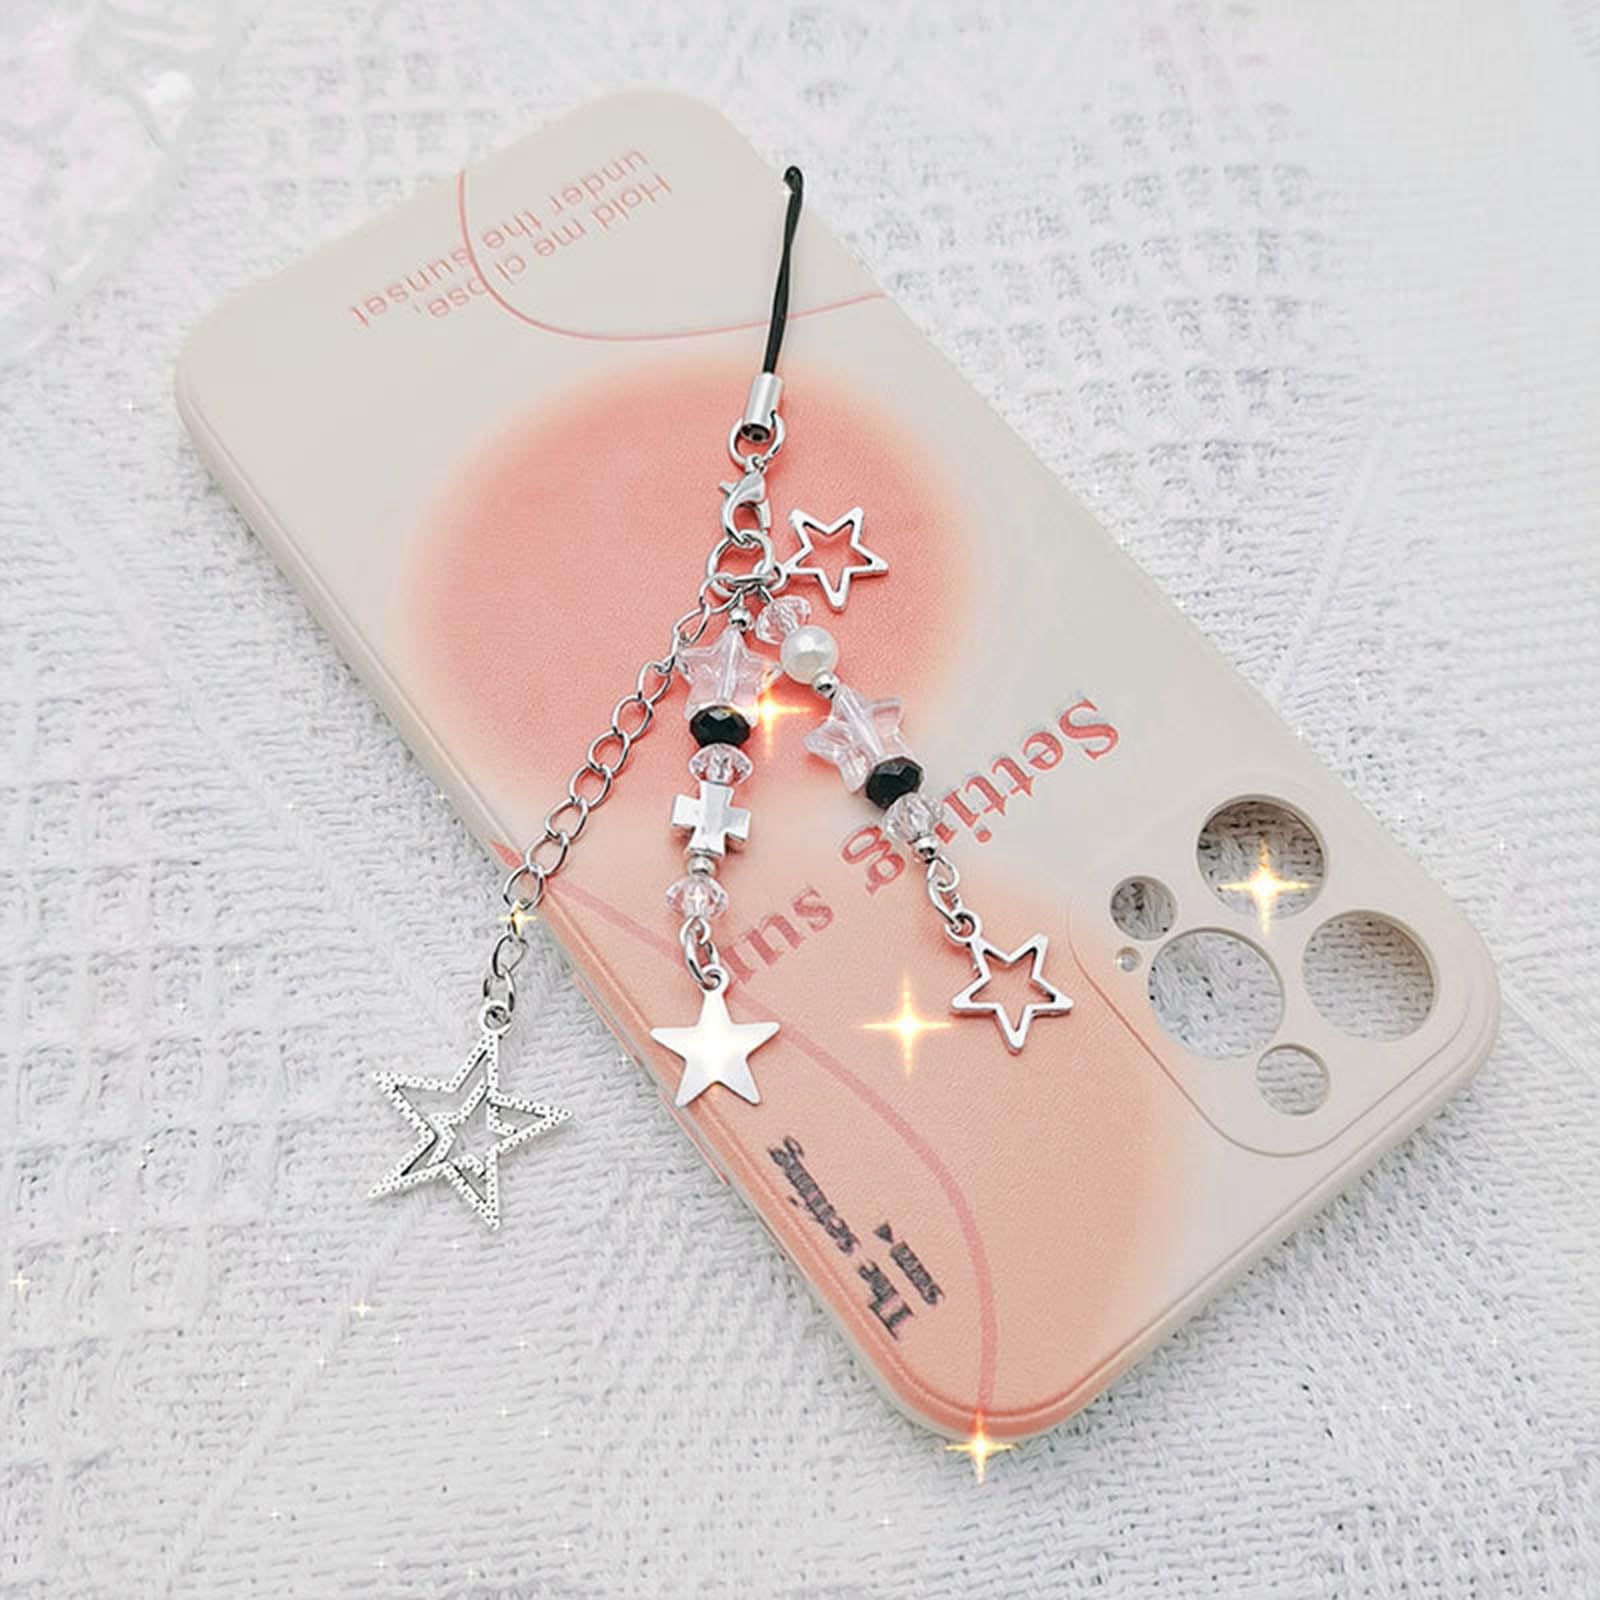 Necvior Pack Of 3 Star Phone Charm Keychain Bag Accessory Star Phone Strap Phone Jewelry Alloy Material For Fashion Lover Y2k Phone Chain